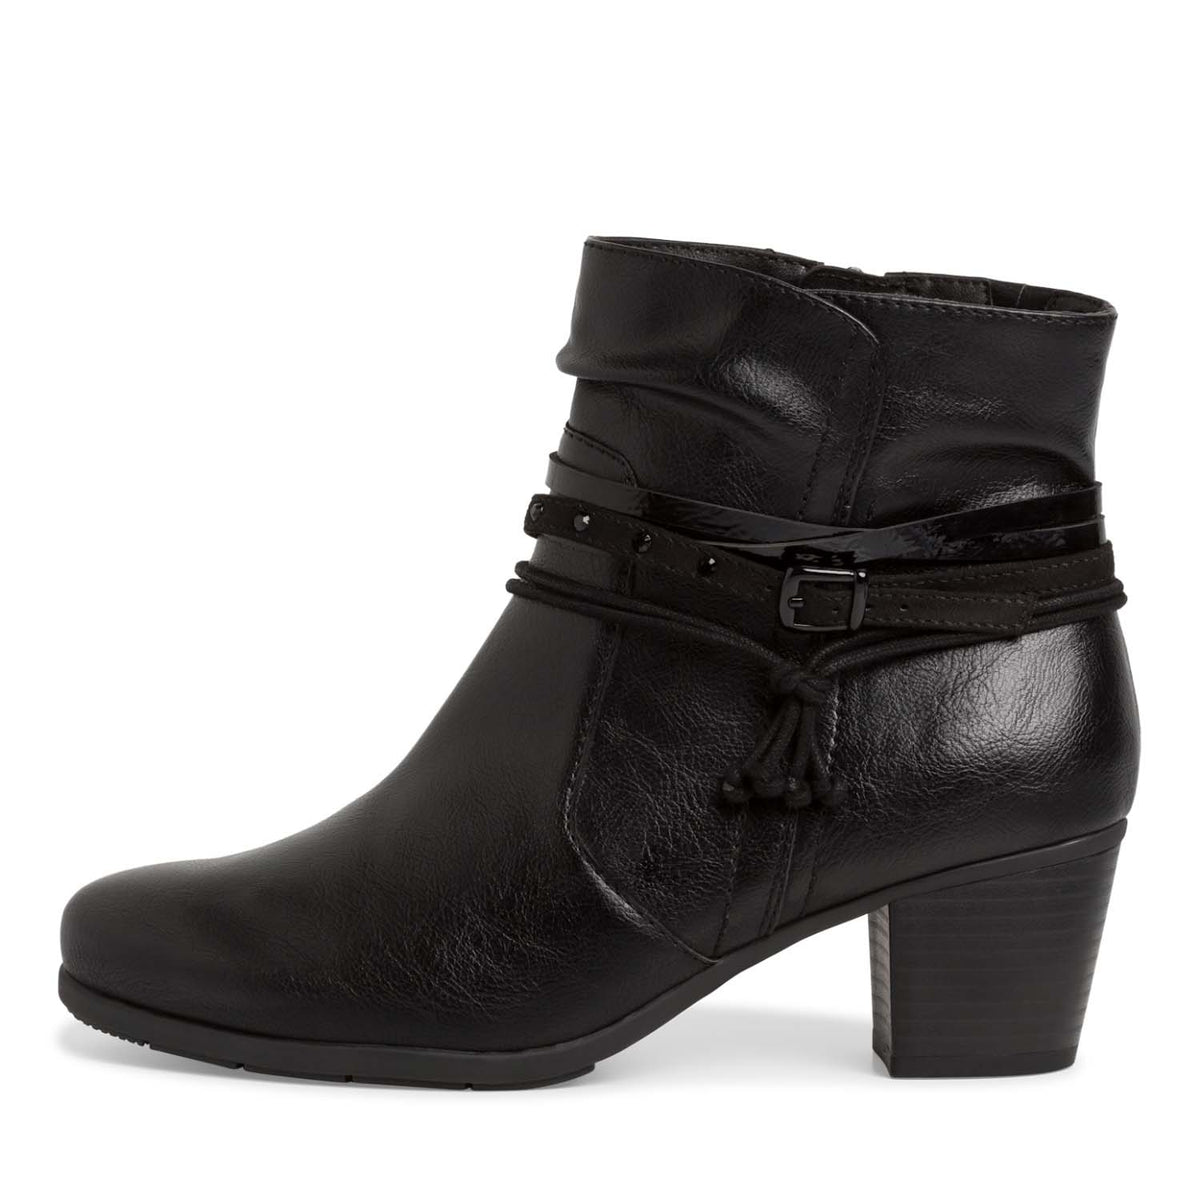 Front view of the Jana Black Block Heel Ankle Boot